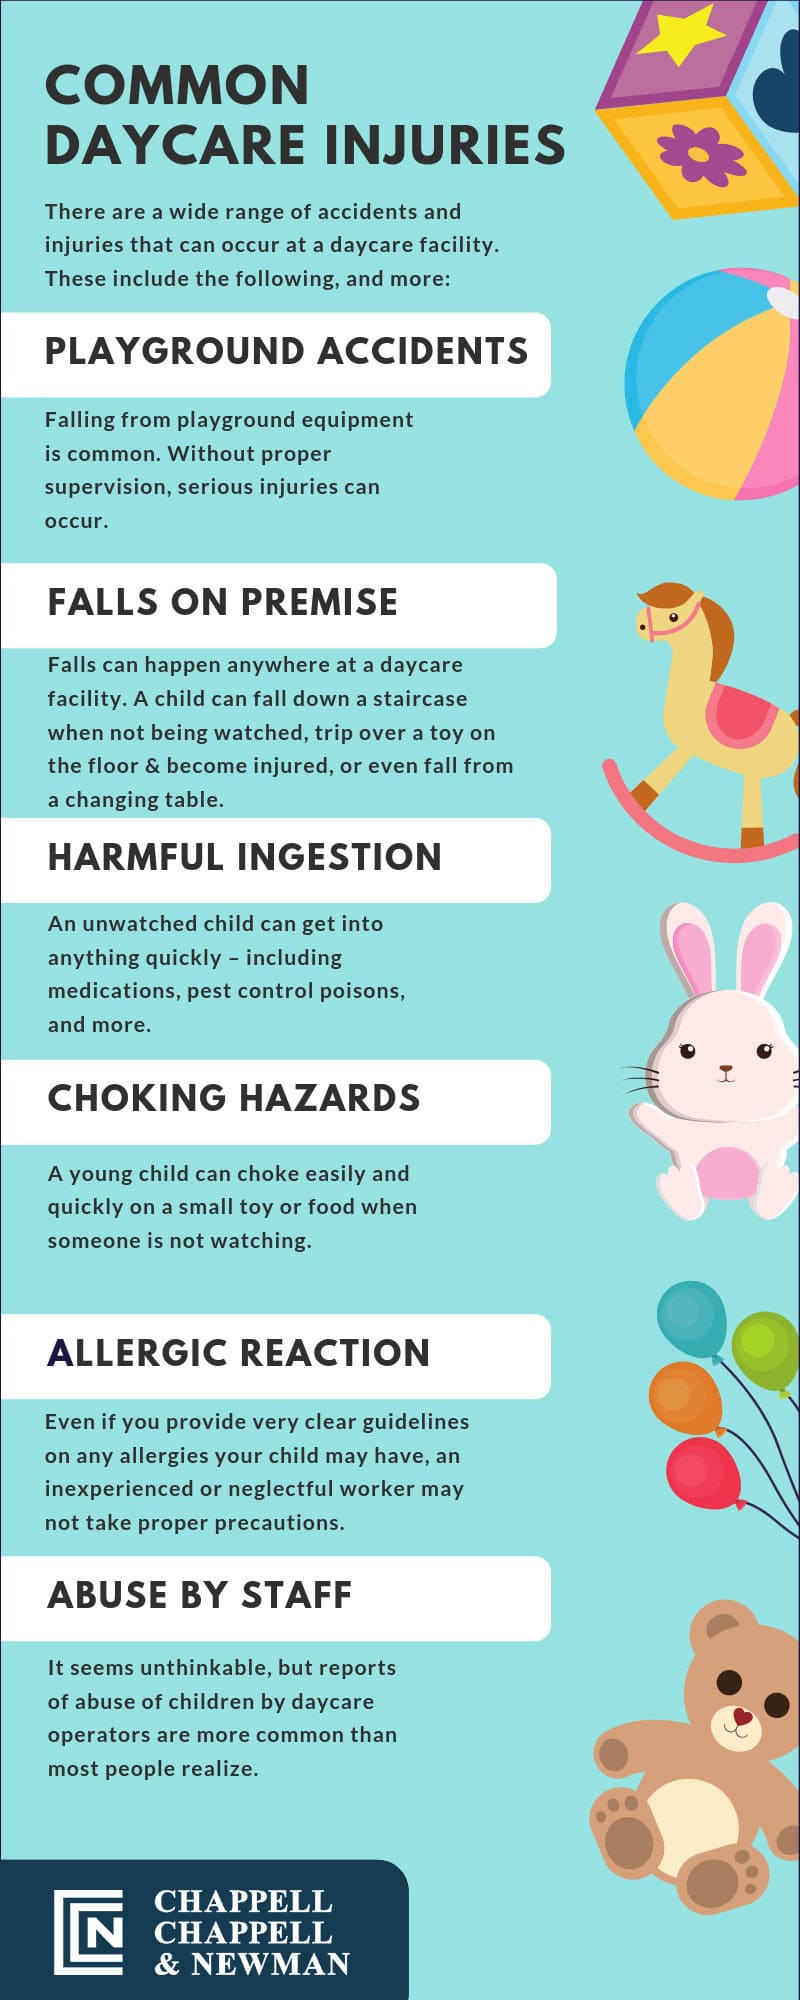 Common daycare injuries infographic